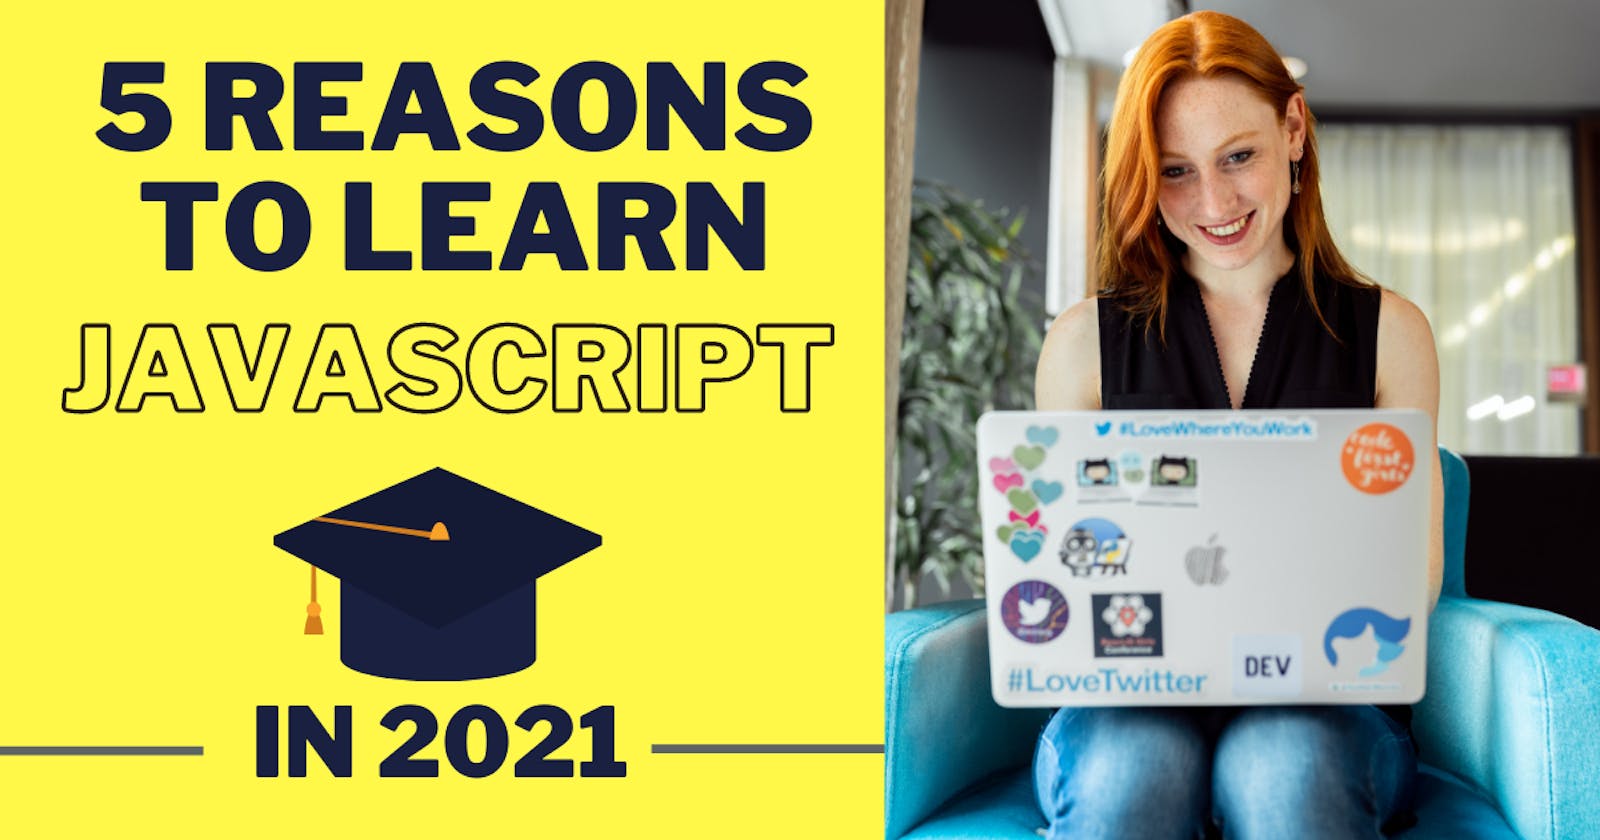 5 REASONS WHY YOU SHOULD LEARN JAVASCRIPT IN 2021